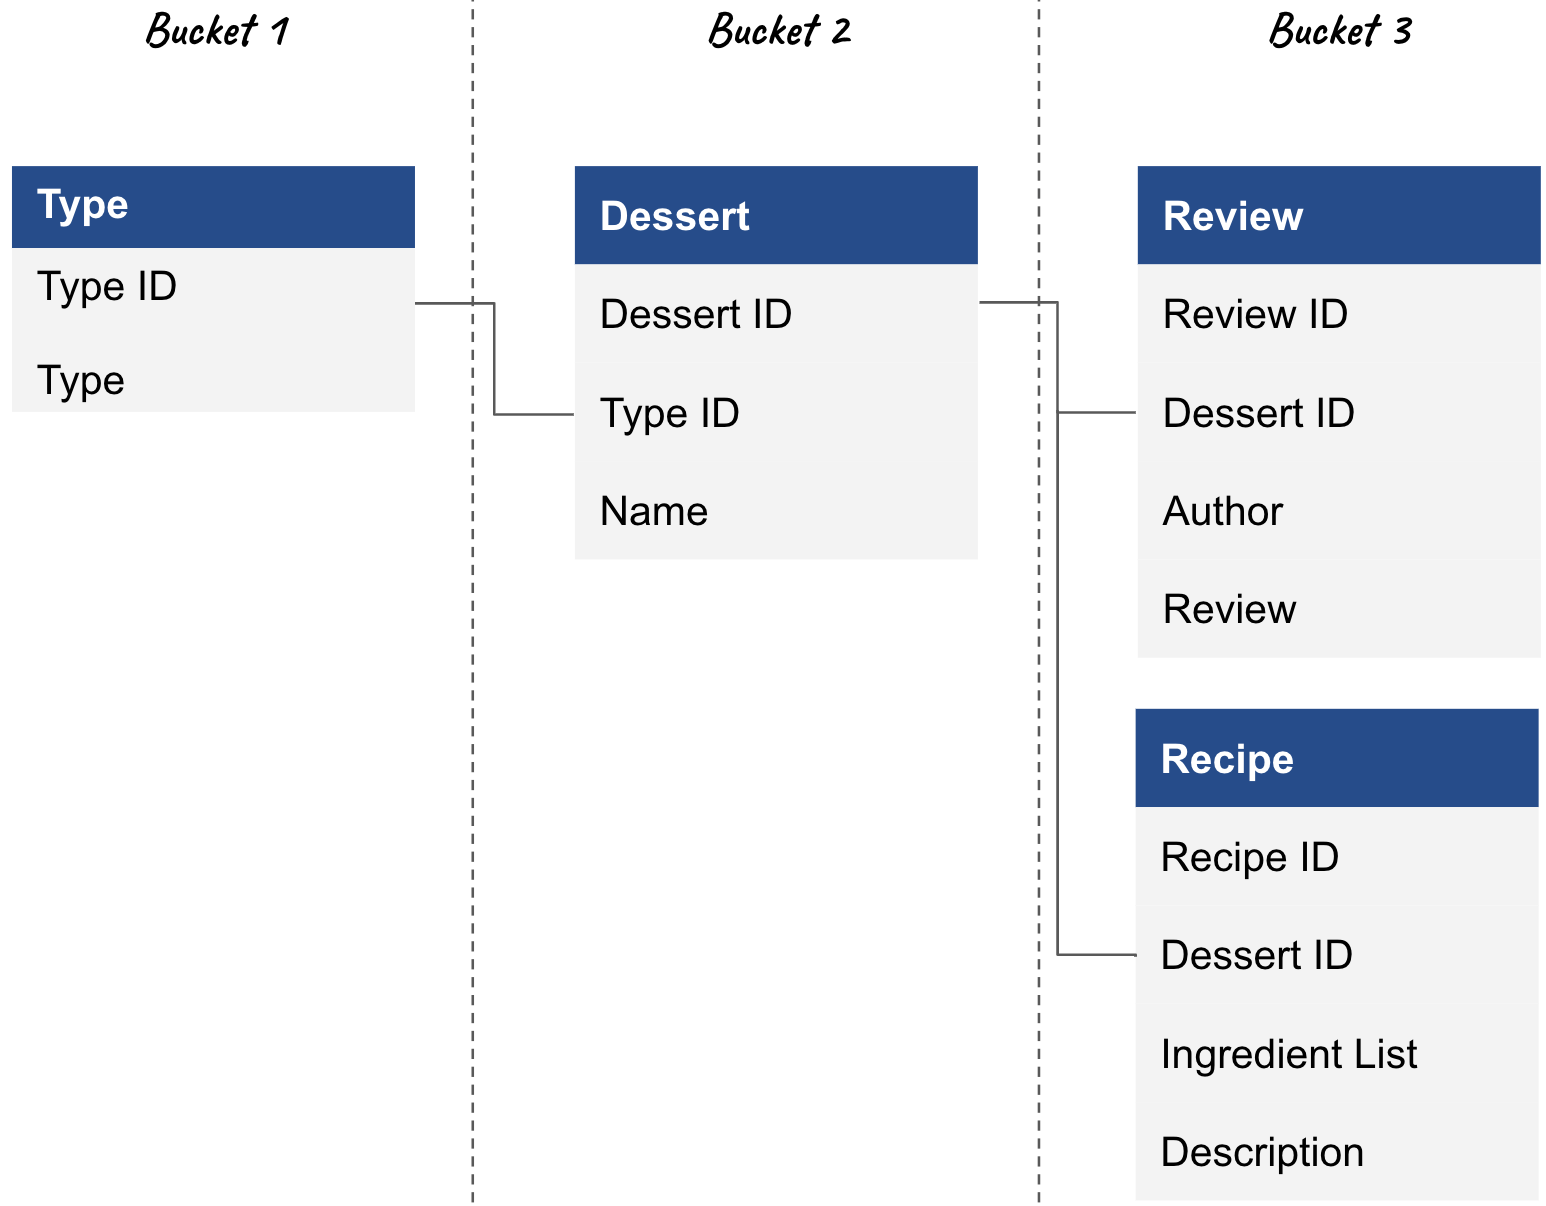 Table structure showing three buckets. Bucket 1 contains Type table, Bucket 2 Dessert table, Bucket 3 Review and Recipate tables